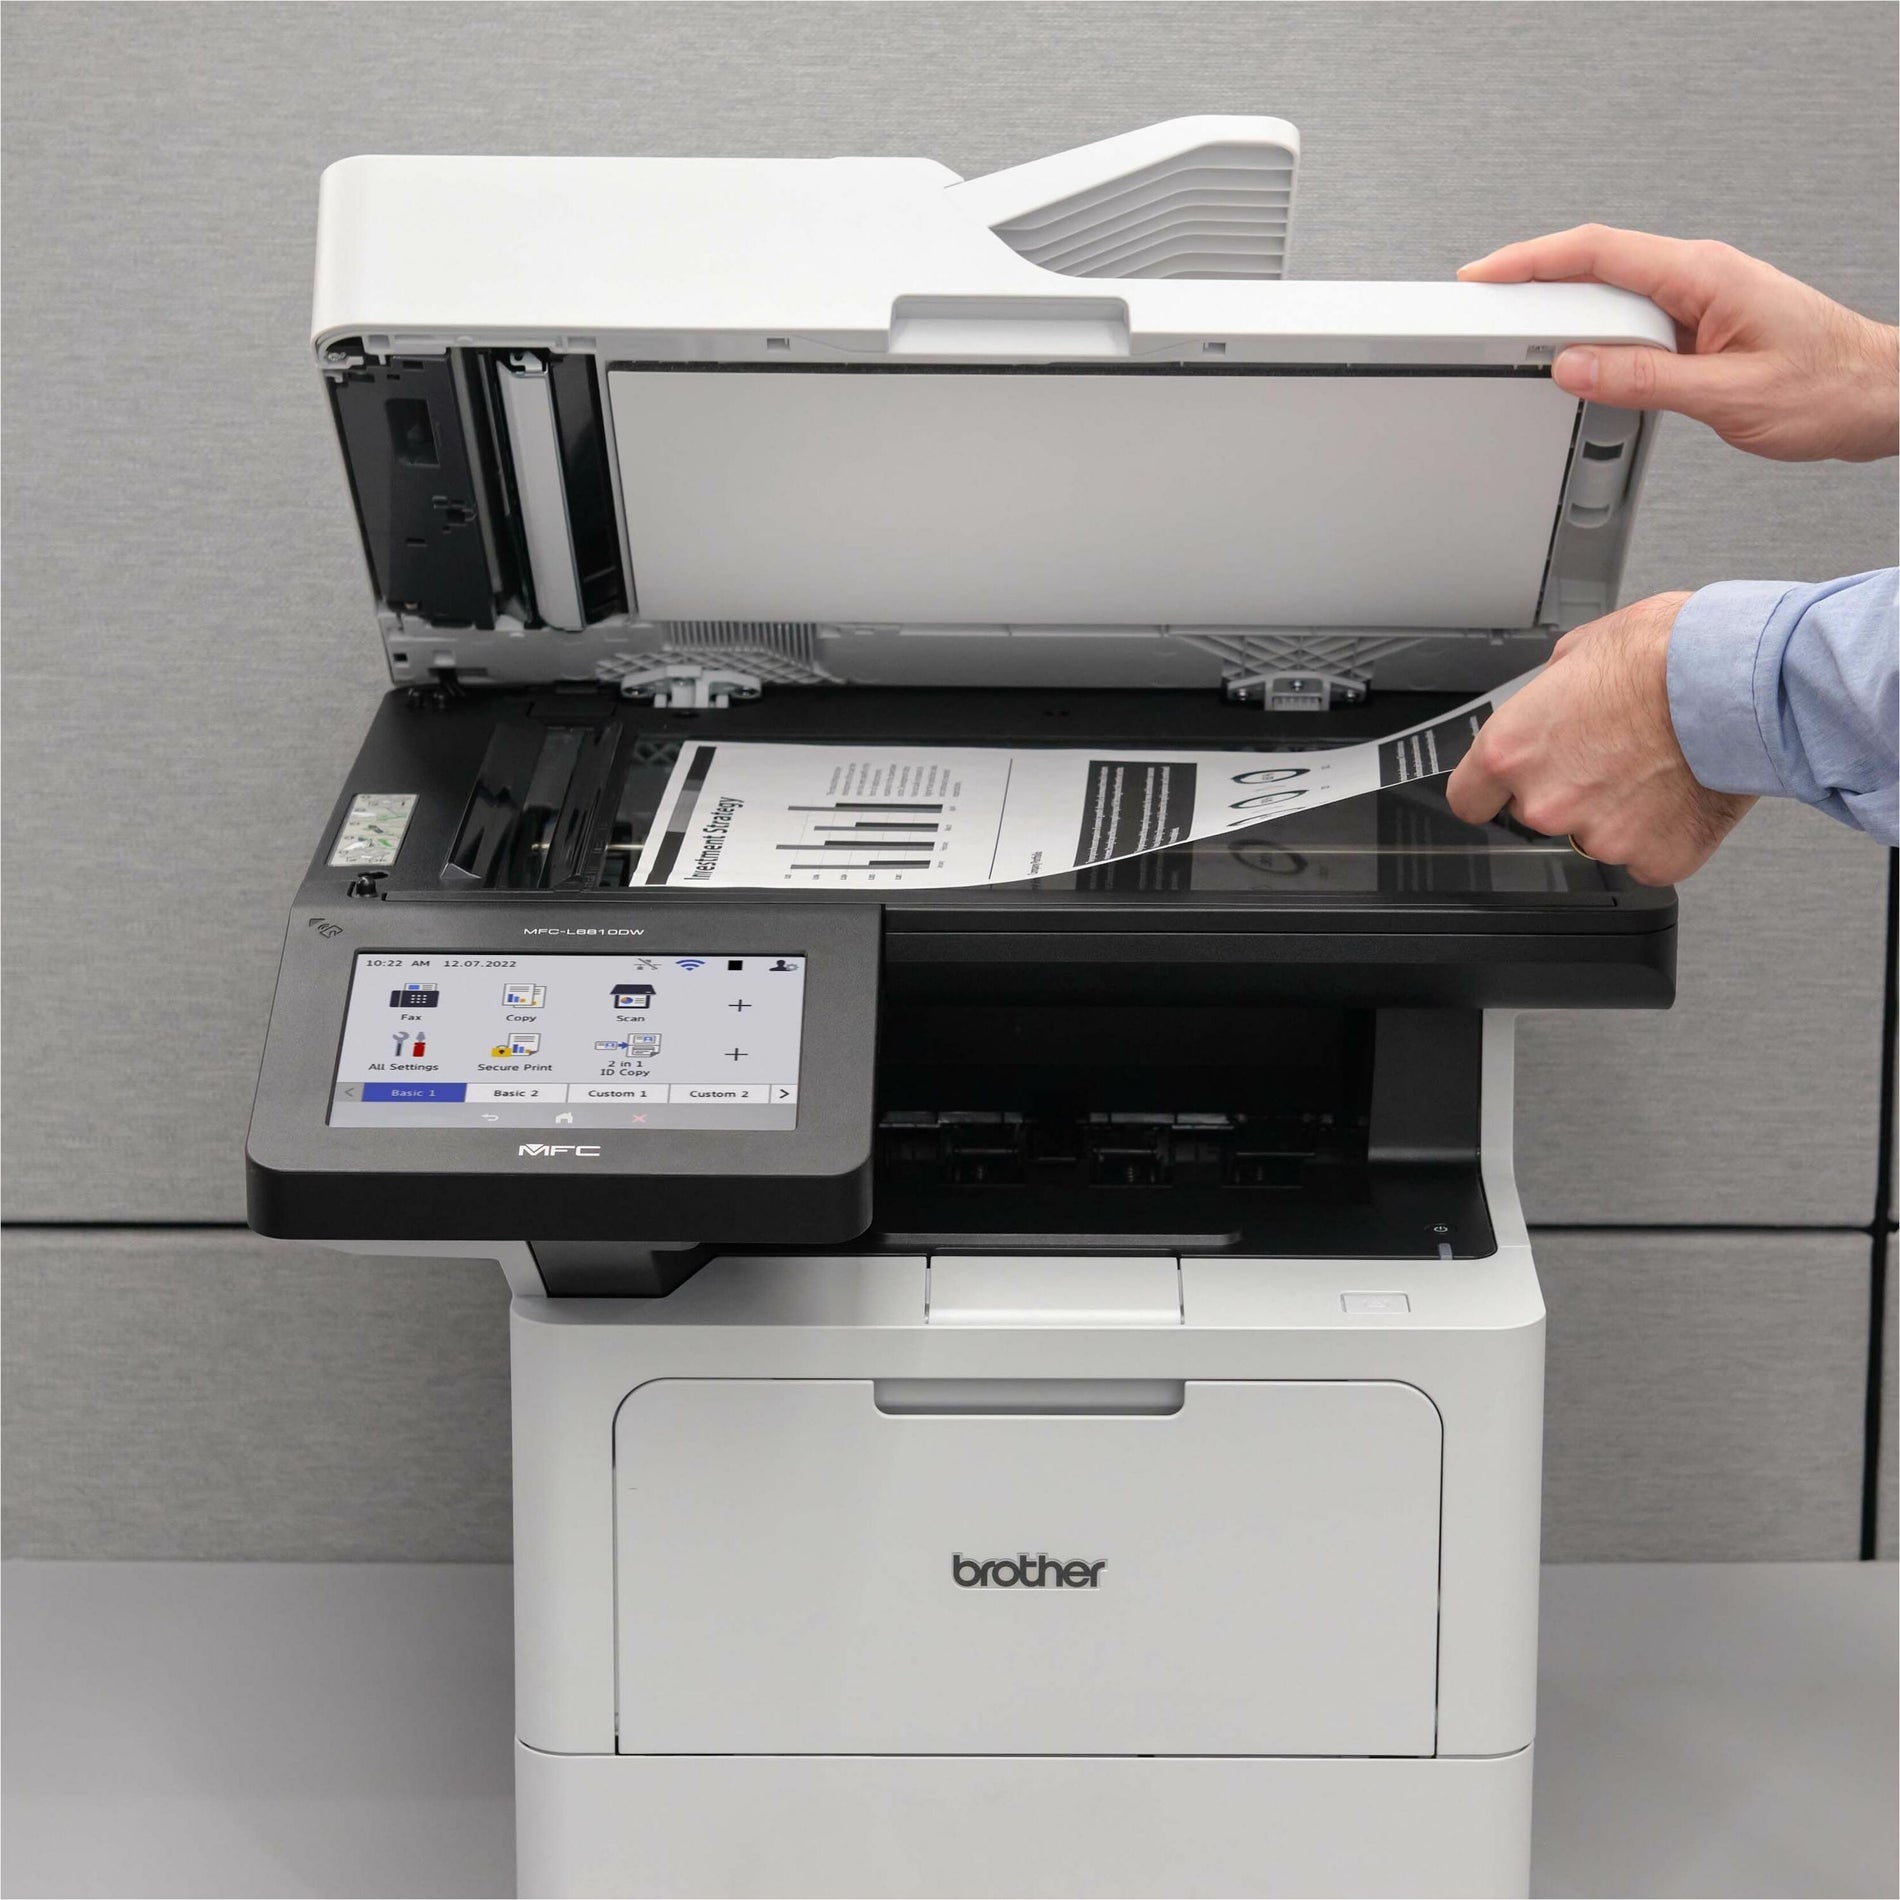 Brother MFCL6810DW MFC-L6810DW Enterprise Monochrome Laser All-in-One Printer, Low-cost Printing